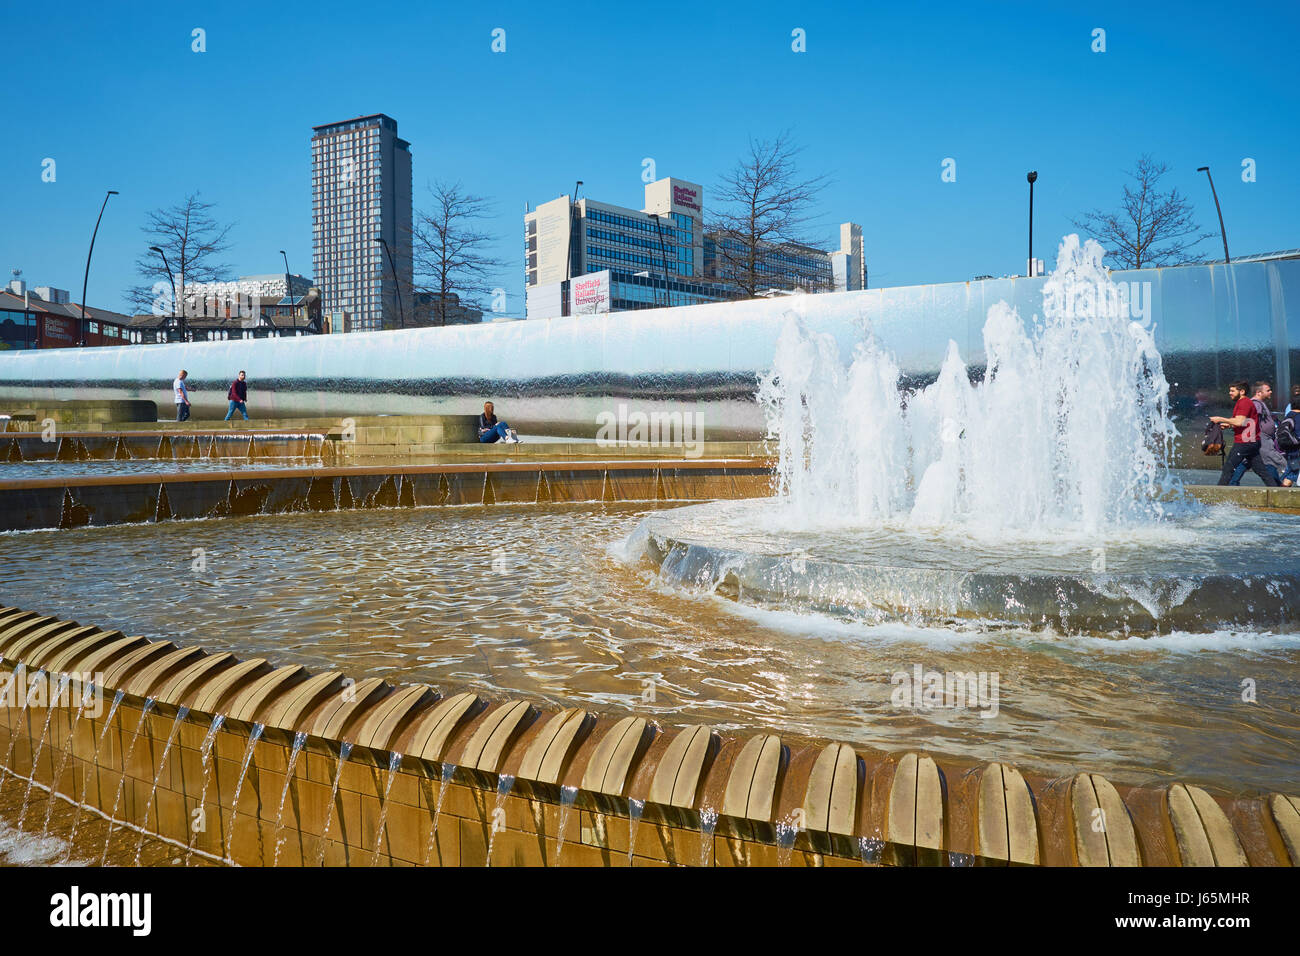 Stainless steel Cutting Edge Sculpture and water fountains, Sheaf Square, Sheffield, South Yorkshire, England Stock Photo